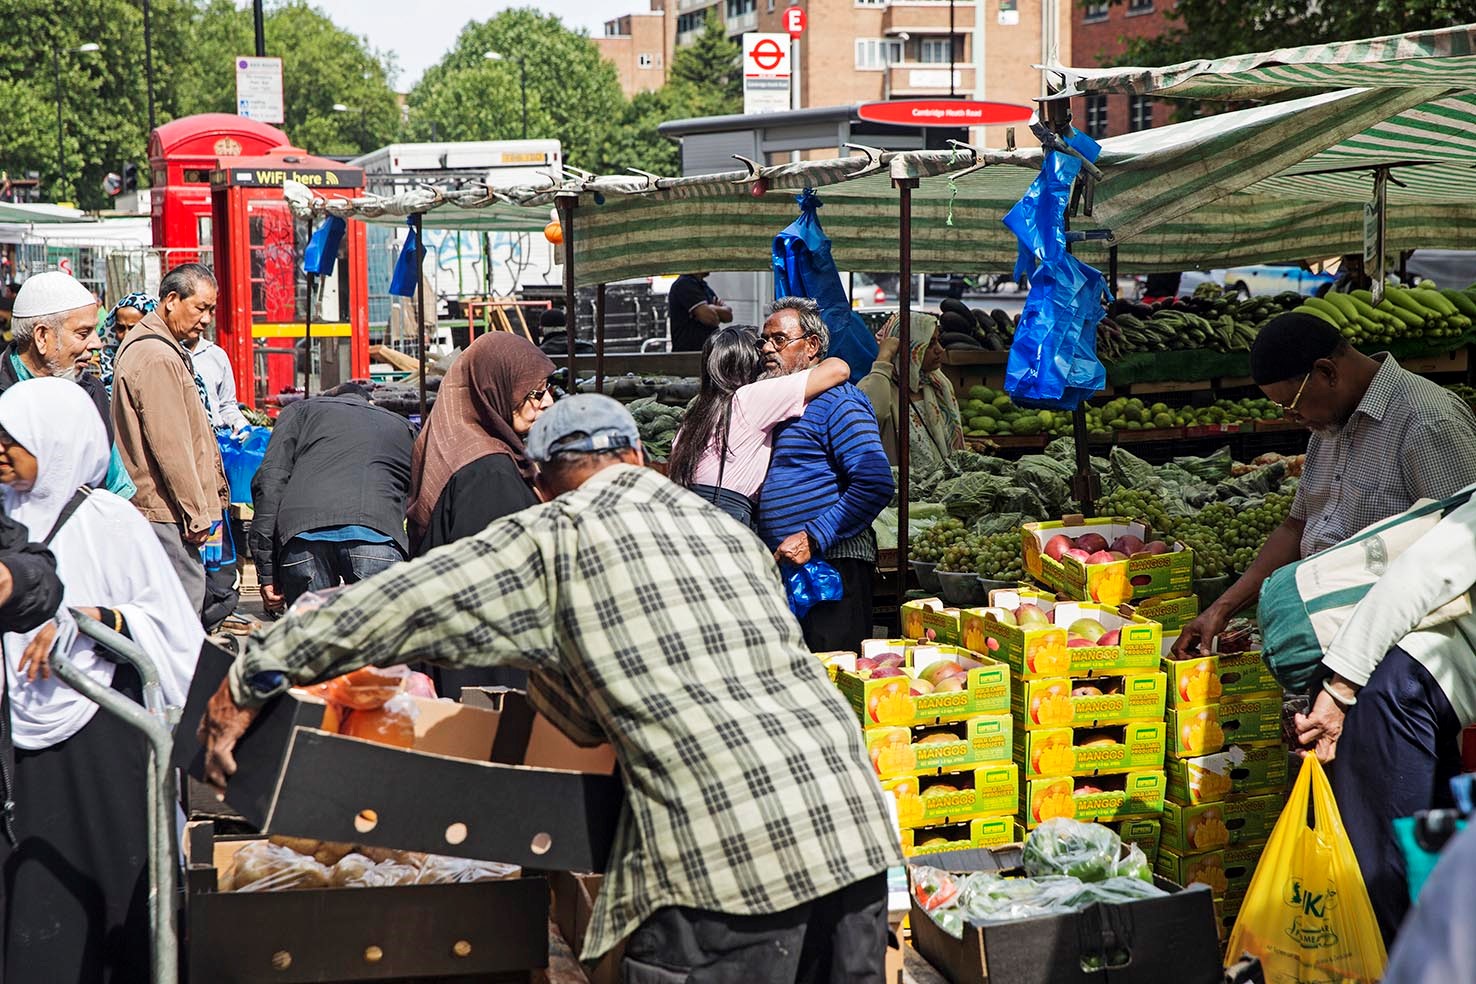 A busy market in an ethnically-diverse part of London